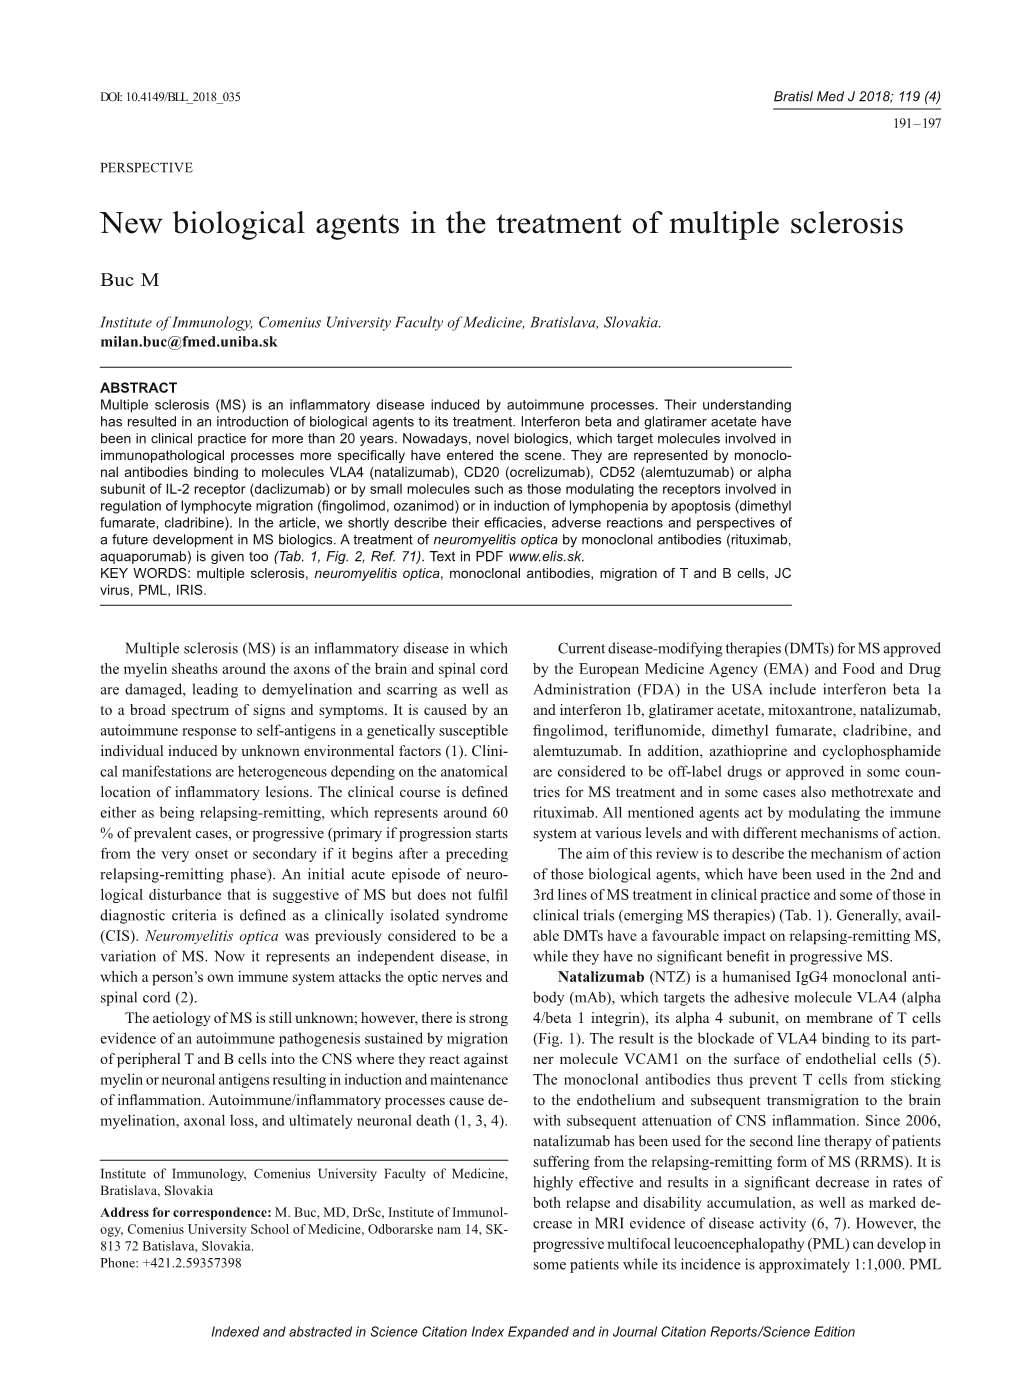 New Biological Agents in the Treatment of Multiple Sclerosis